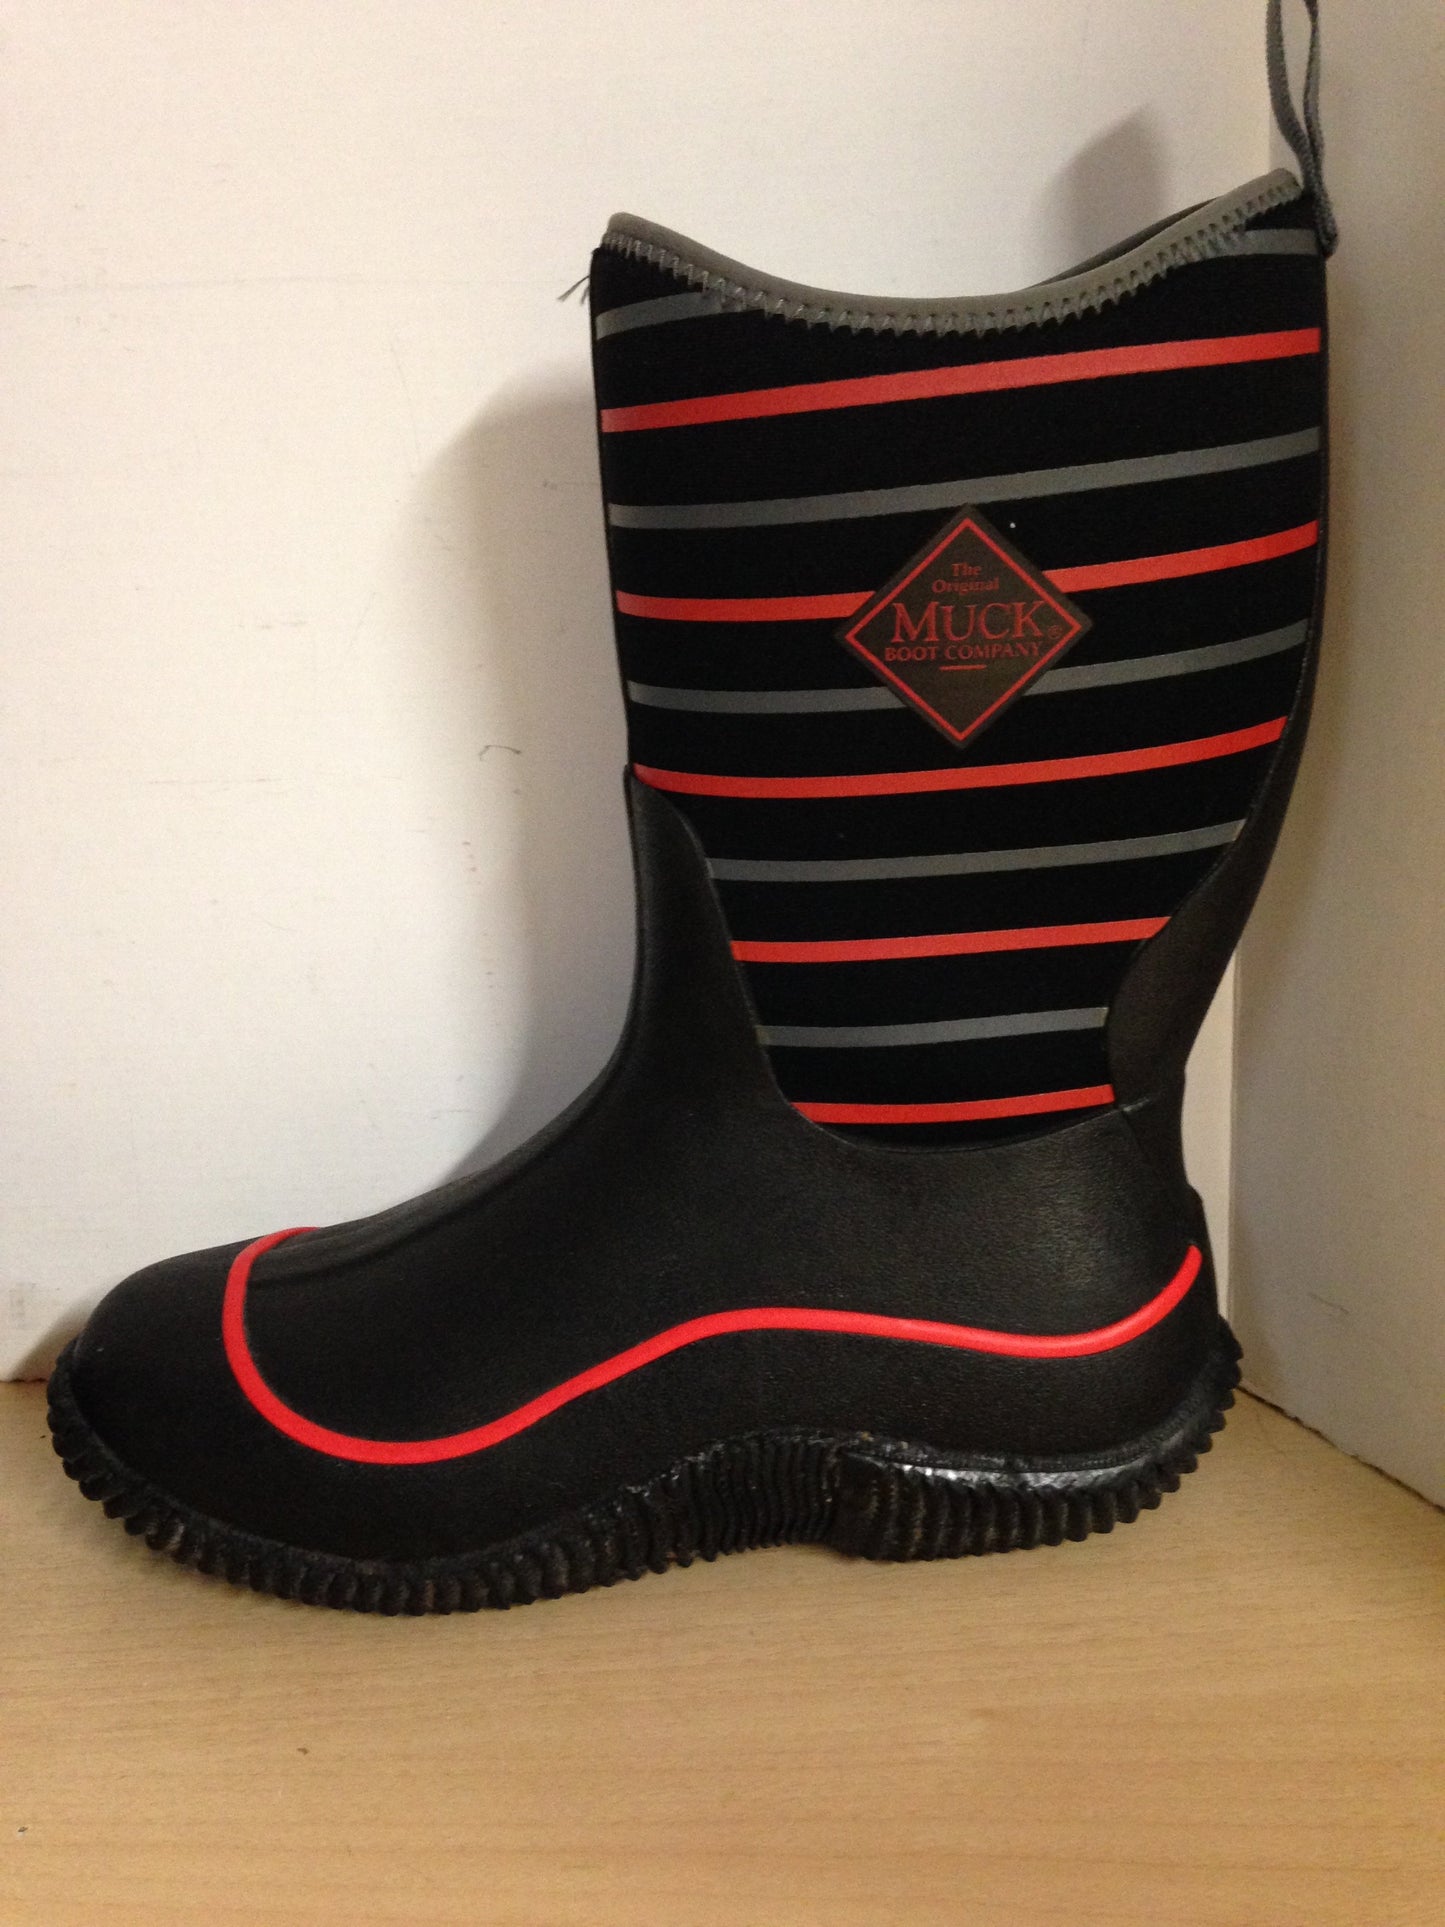 Bogs Style Child Size 7 Youth Teen Muck Neoprene Rubber Rain Winter Boots Black Red Excellent